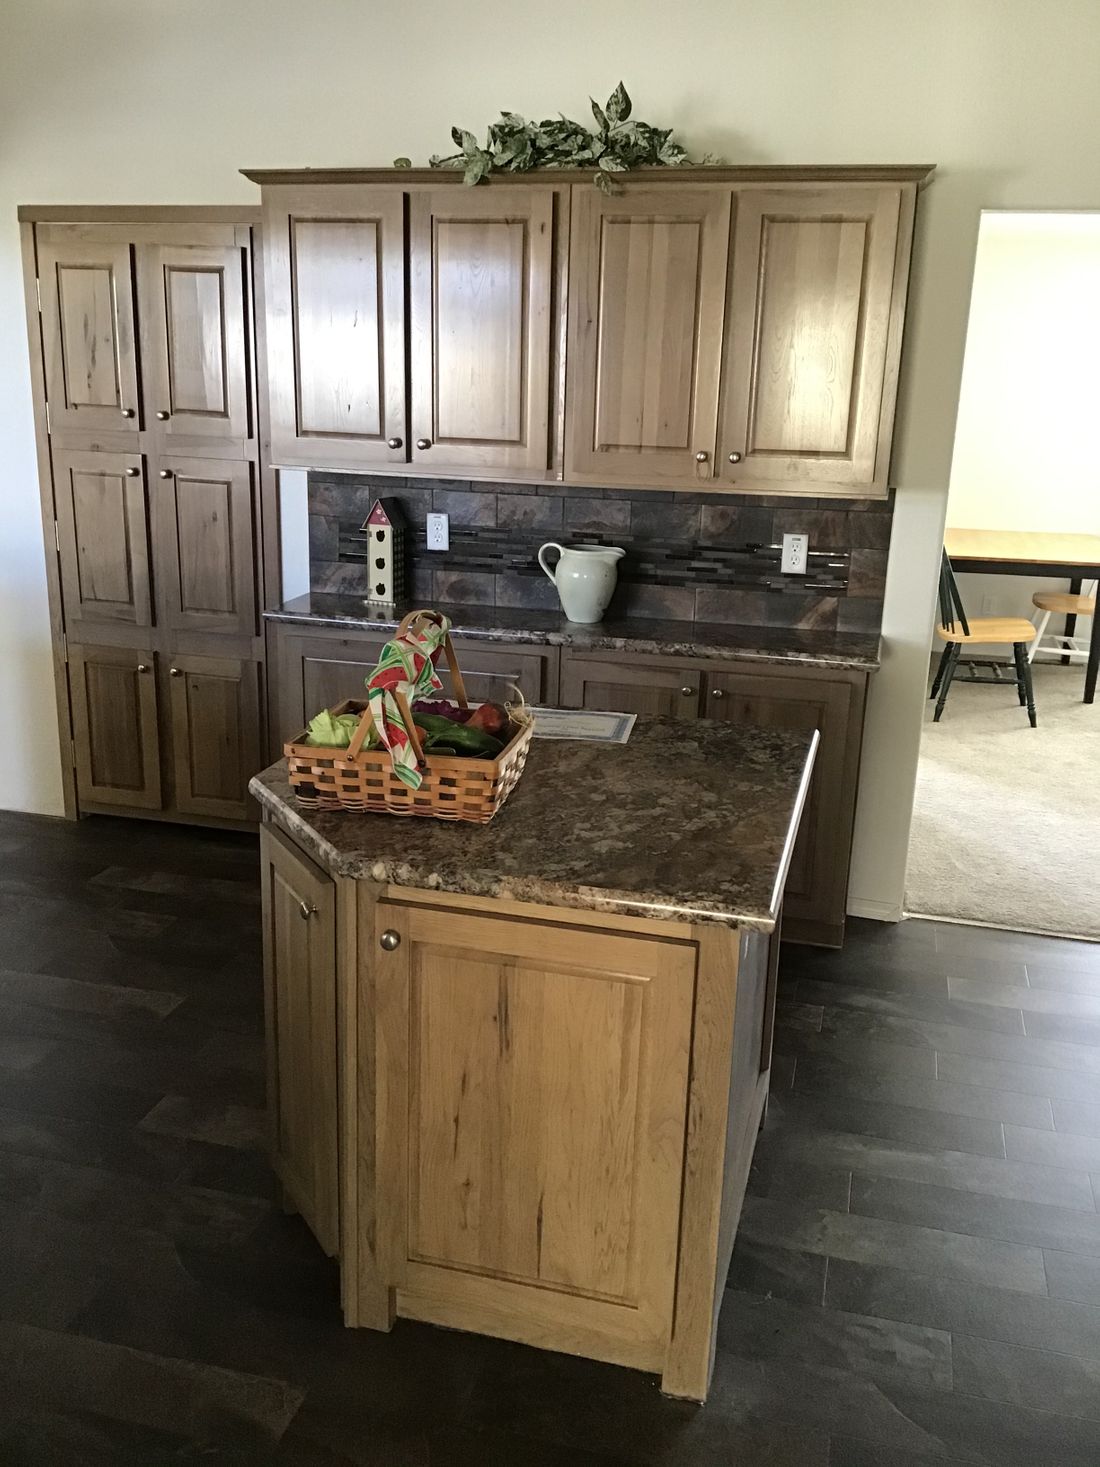 The 9593S         WASHINGTON Kitchen. This Manufactured Mobile Home features 3 bedrooms and 3 baths.